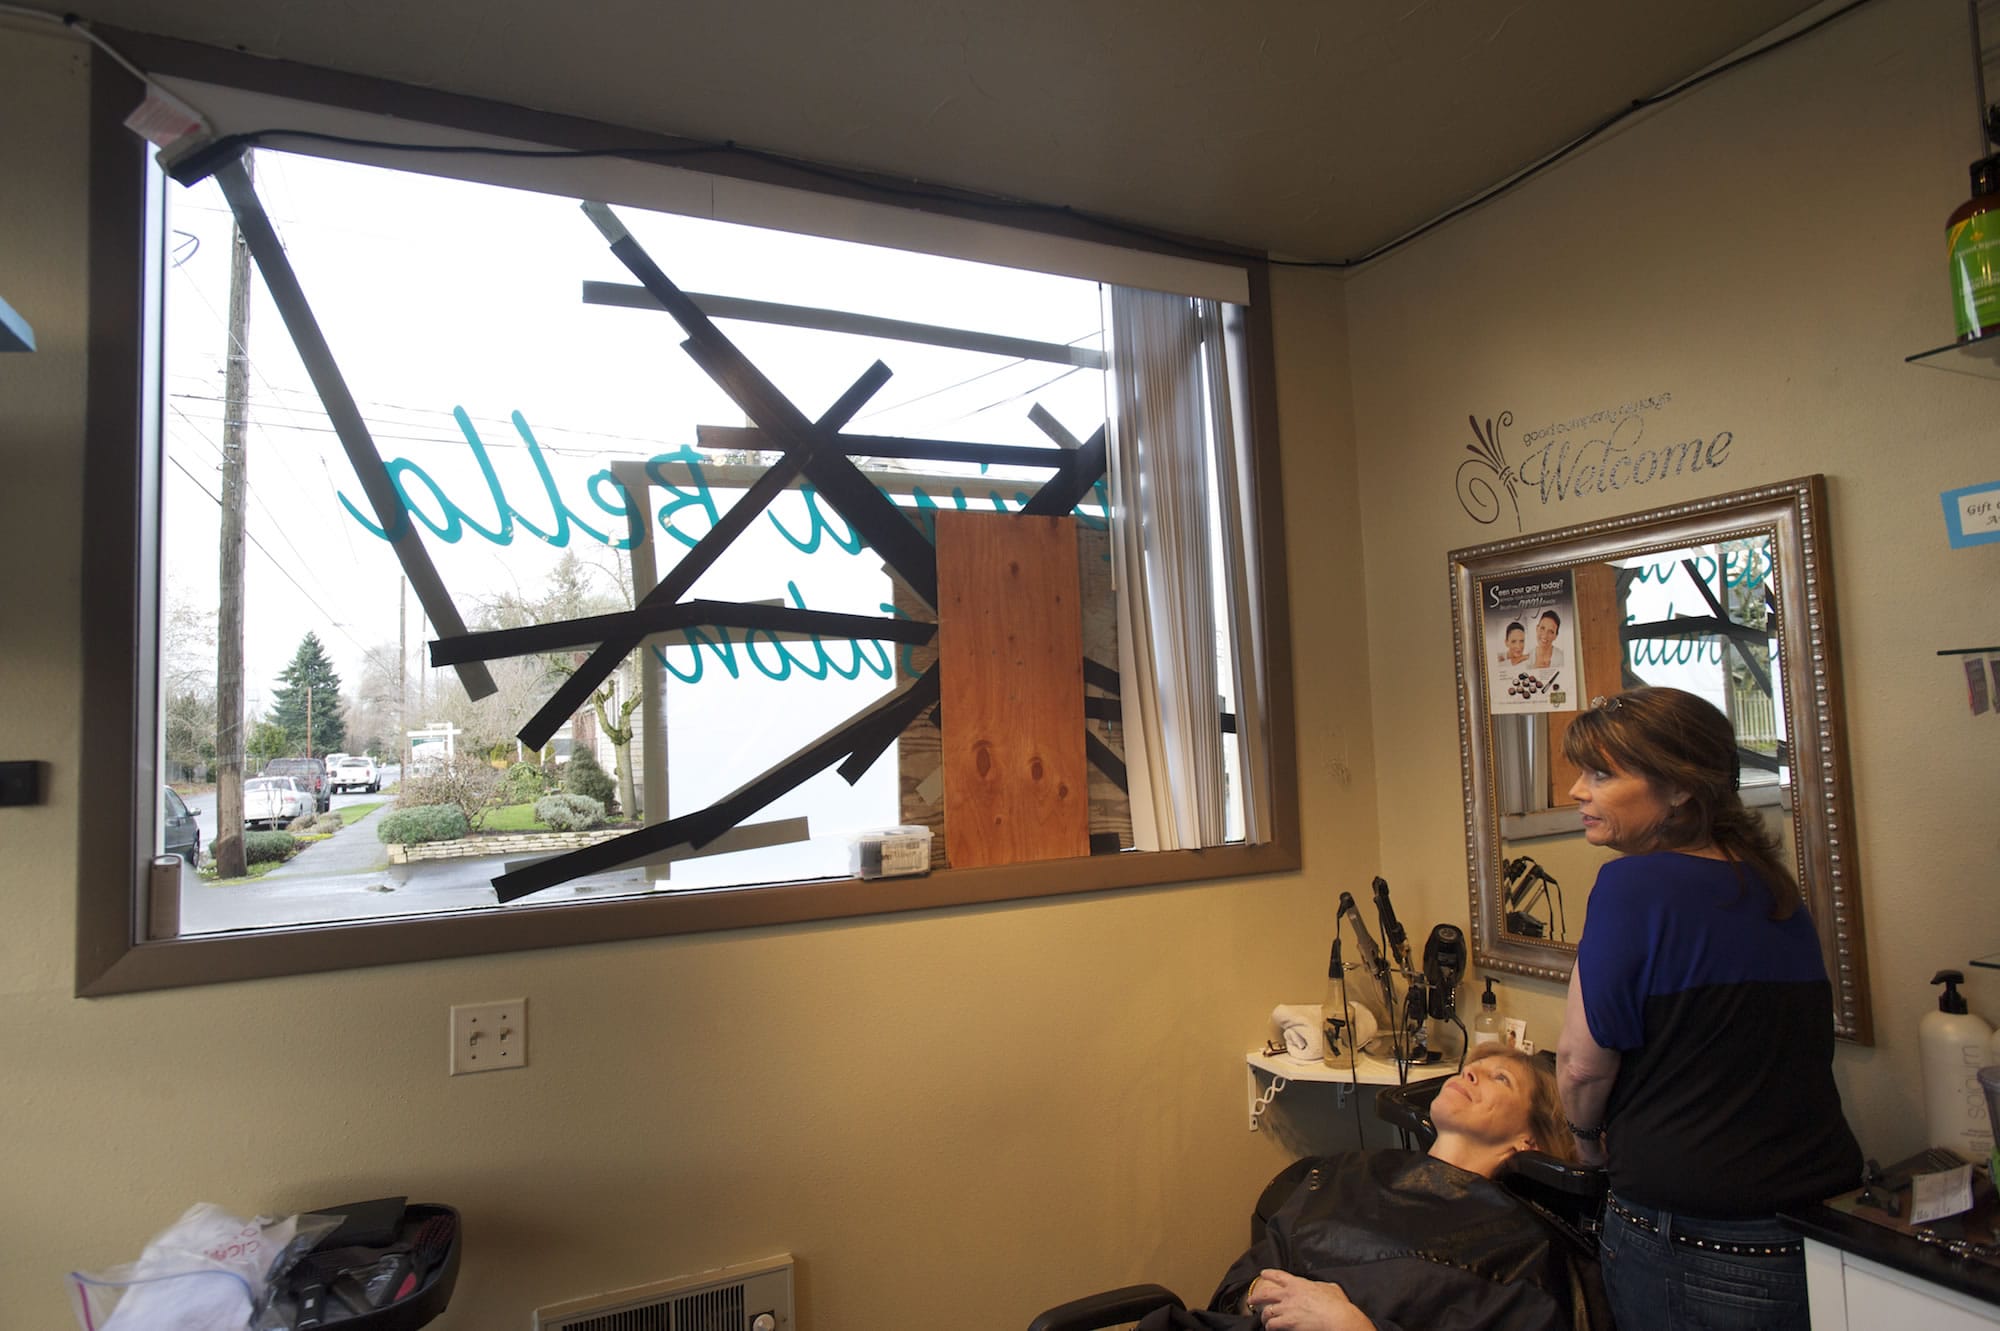 Prima Bella Salon was one of several properties vandalized along 39th Street in Vancouver's Lincoln neighborhood in December. Hairdresser Debi Clark washes client Patti Finnell's hair while she talks about finding glass all over the salon floor the morning the business was vandalized.